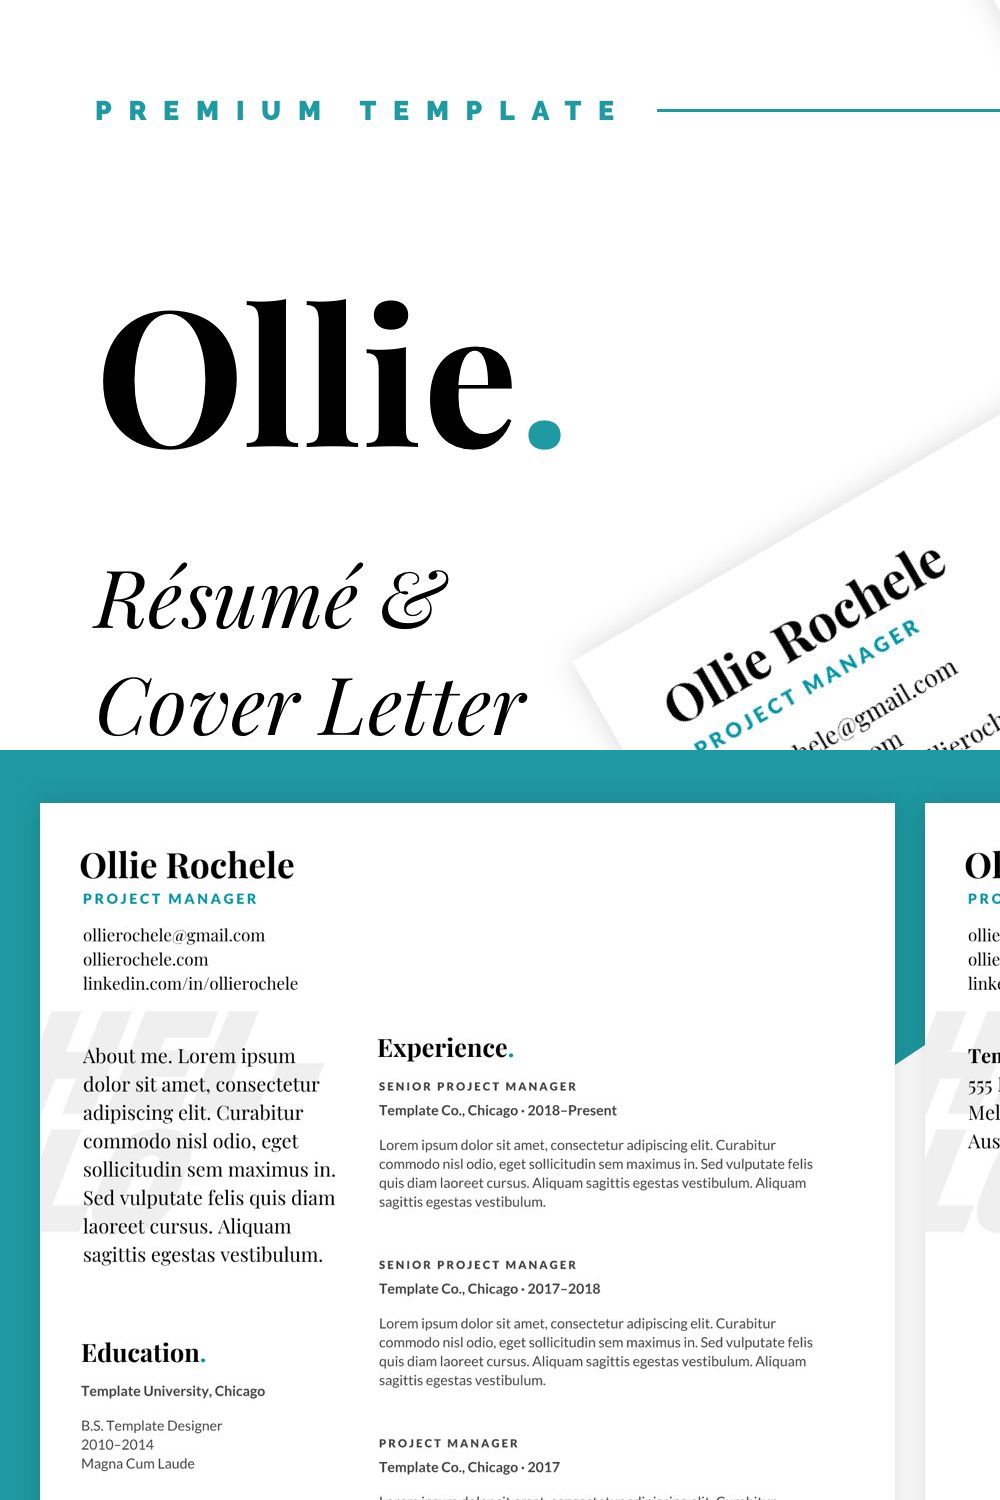 Ollie - Resume and Cover Letter pinterest preview image.